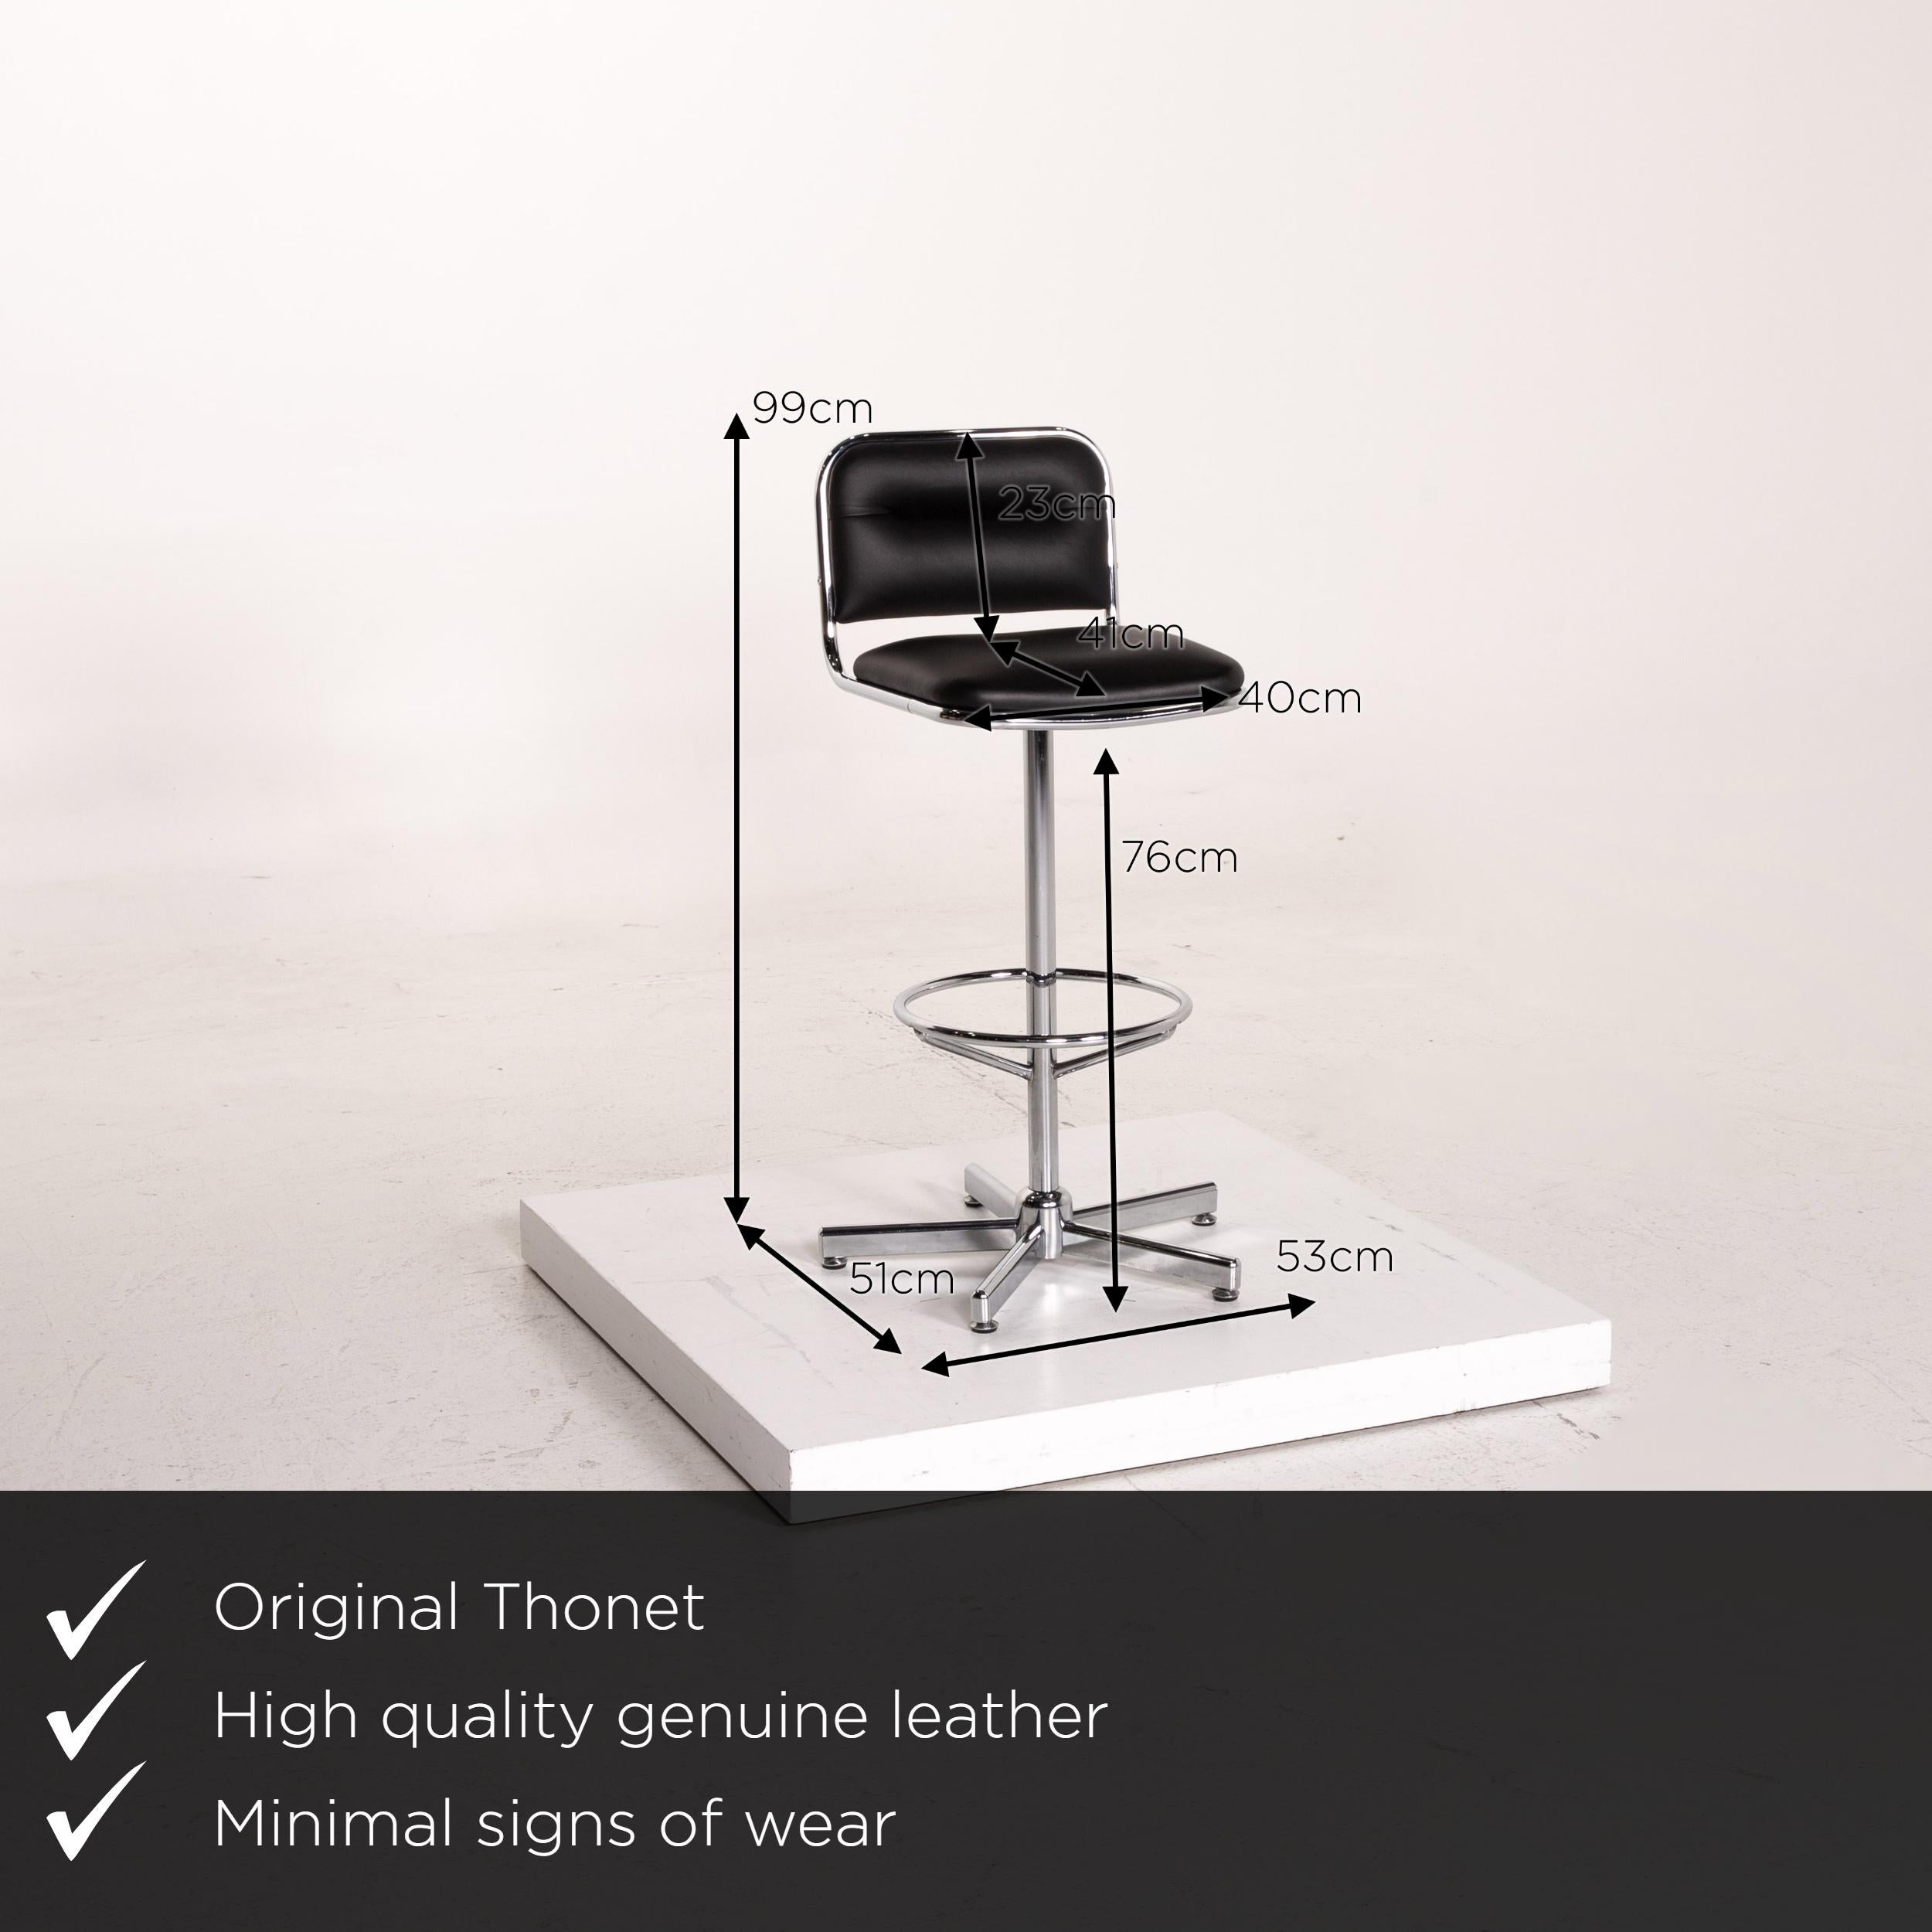 We present to you a Thonet leather bar stool black chair metal.

 

 Product measurements in centimeters:
 

Depth 51
Width 53
Height 99
Seat height 76
Seat depth 41
Seat width 40
Back height 23.
  